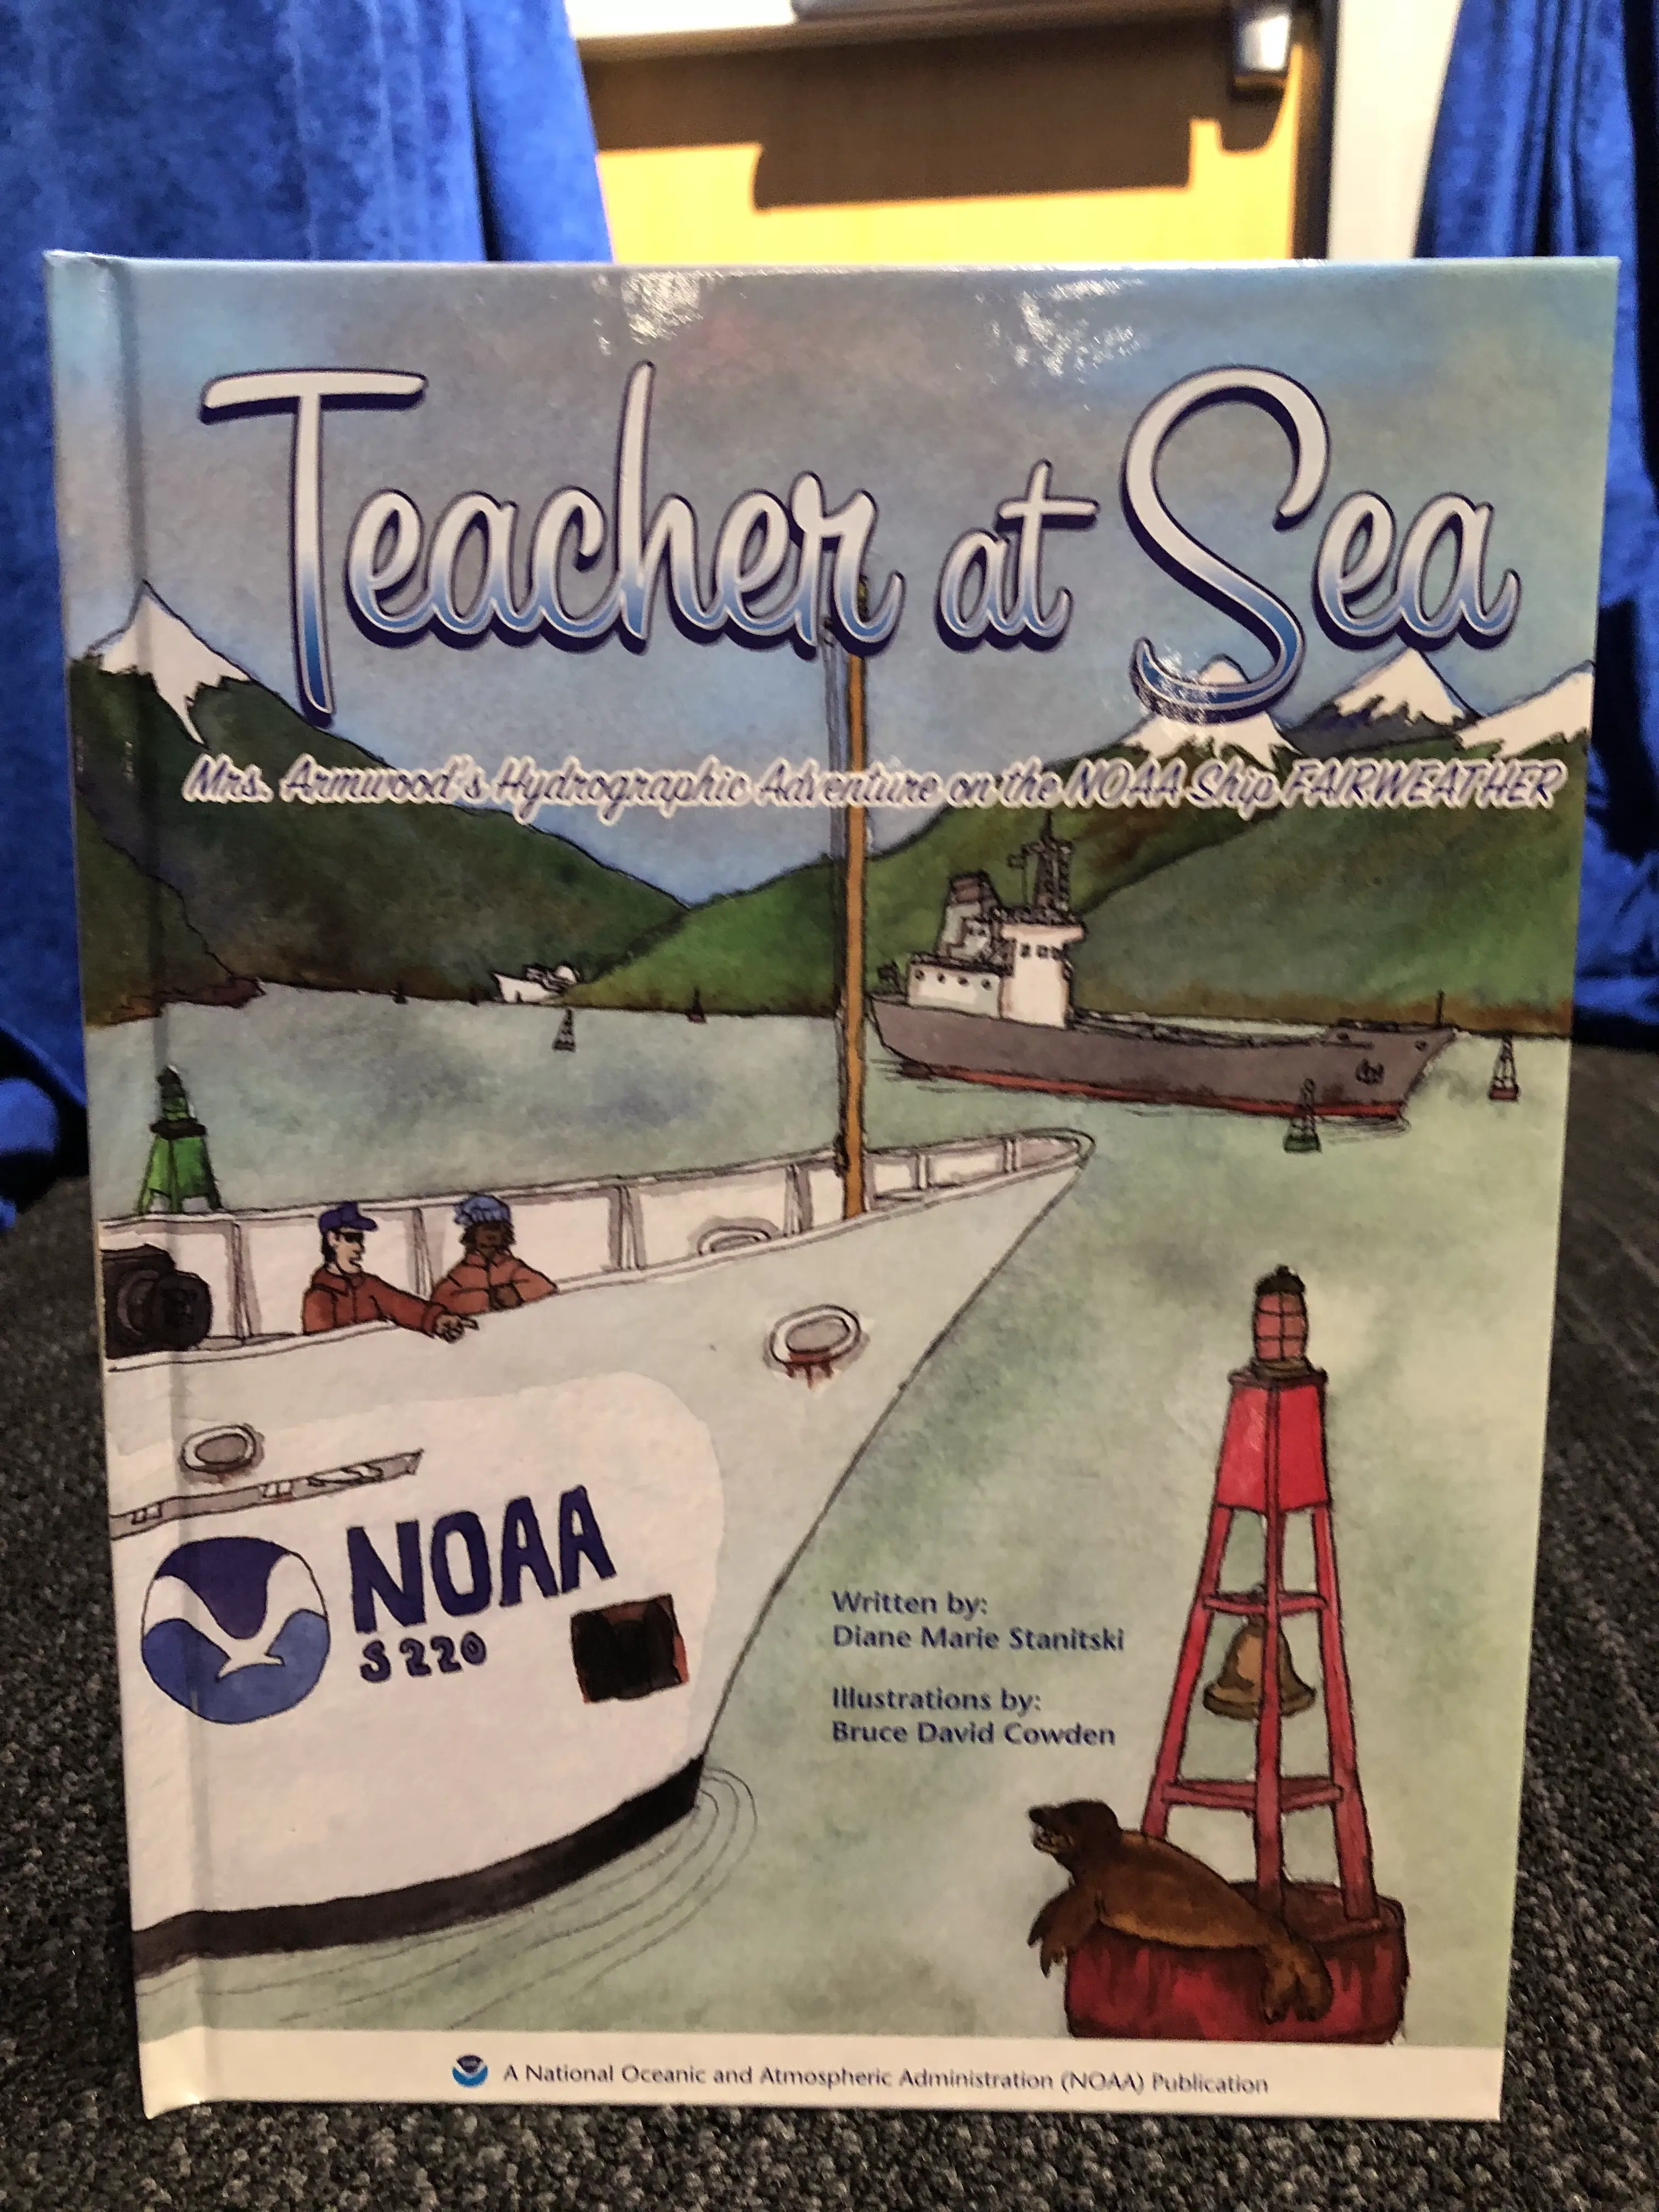 DIY STEM Learning Activity - Read Teacher at Sea NOAA Expedition Book!